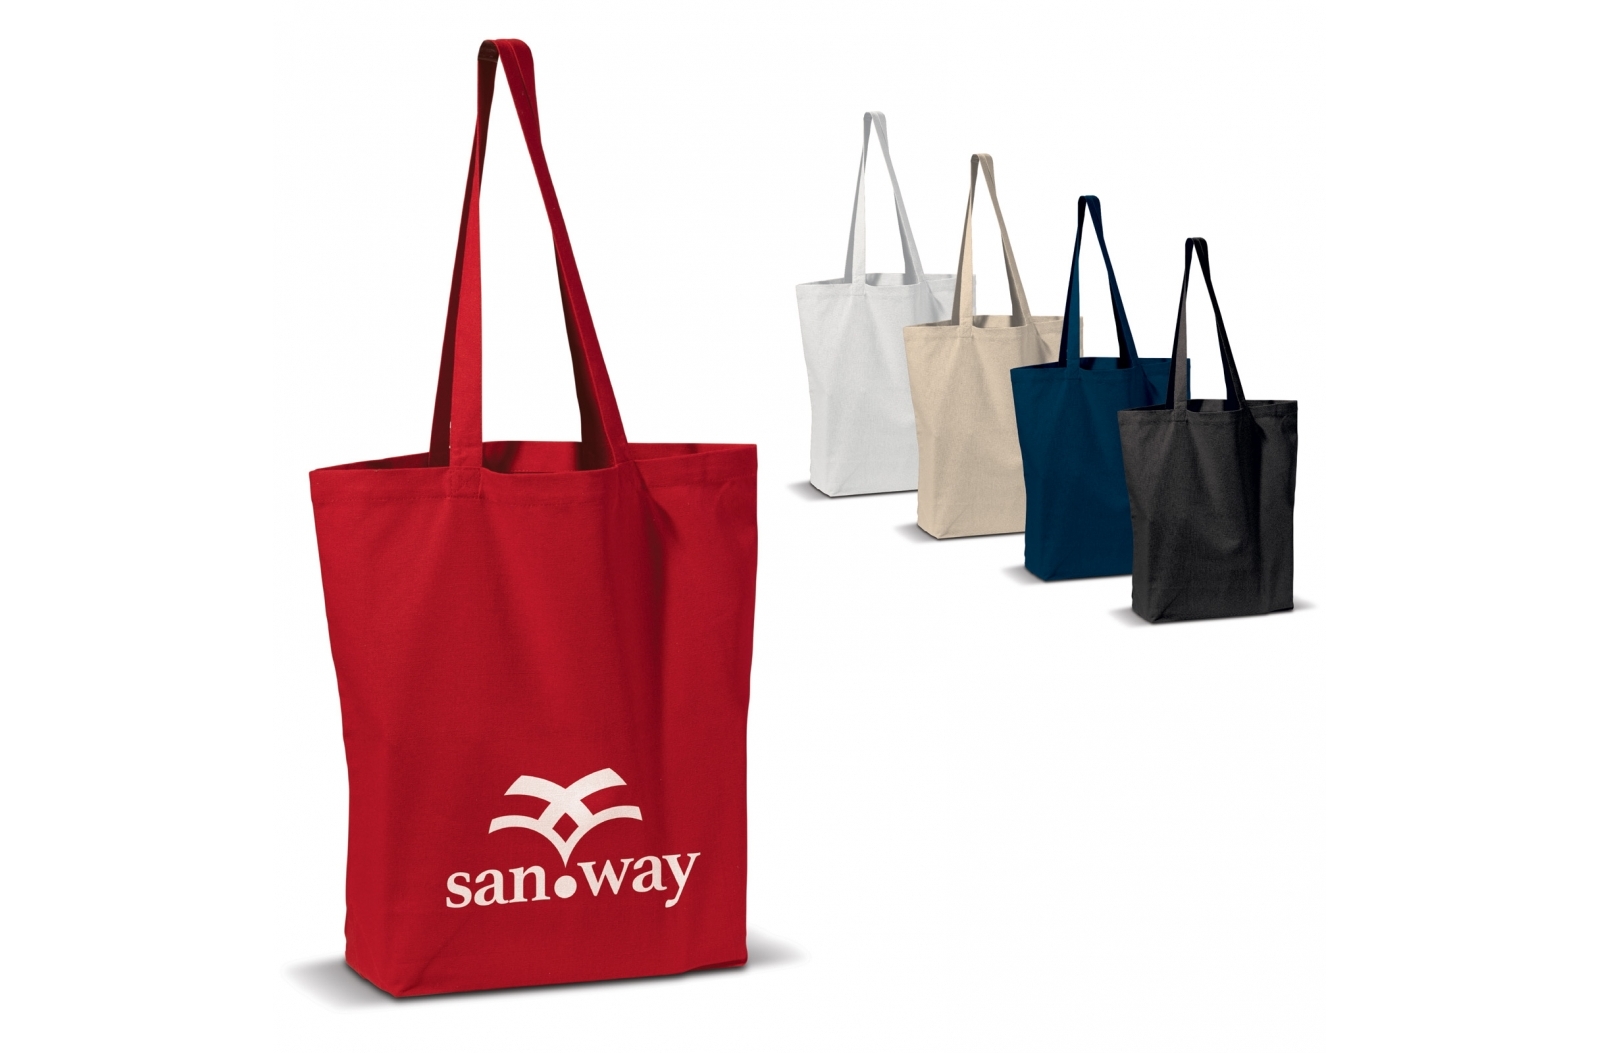 High-Quality Rectangular Cotton Canvas Bag with Long Handles - St Sampson's